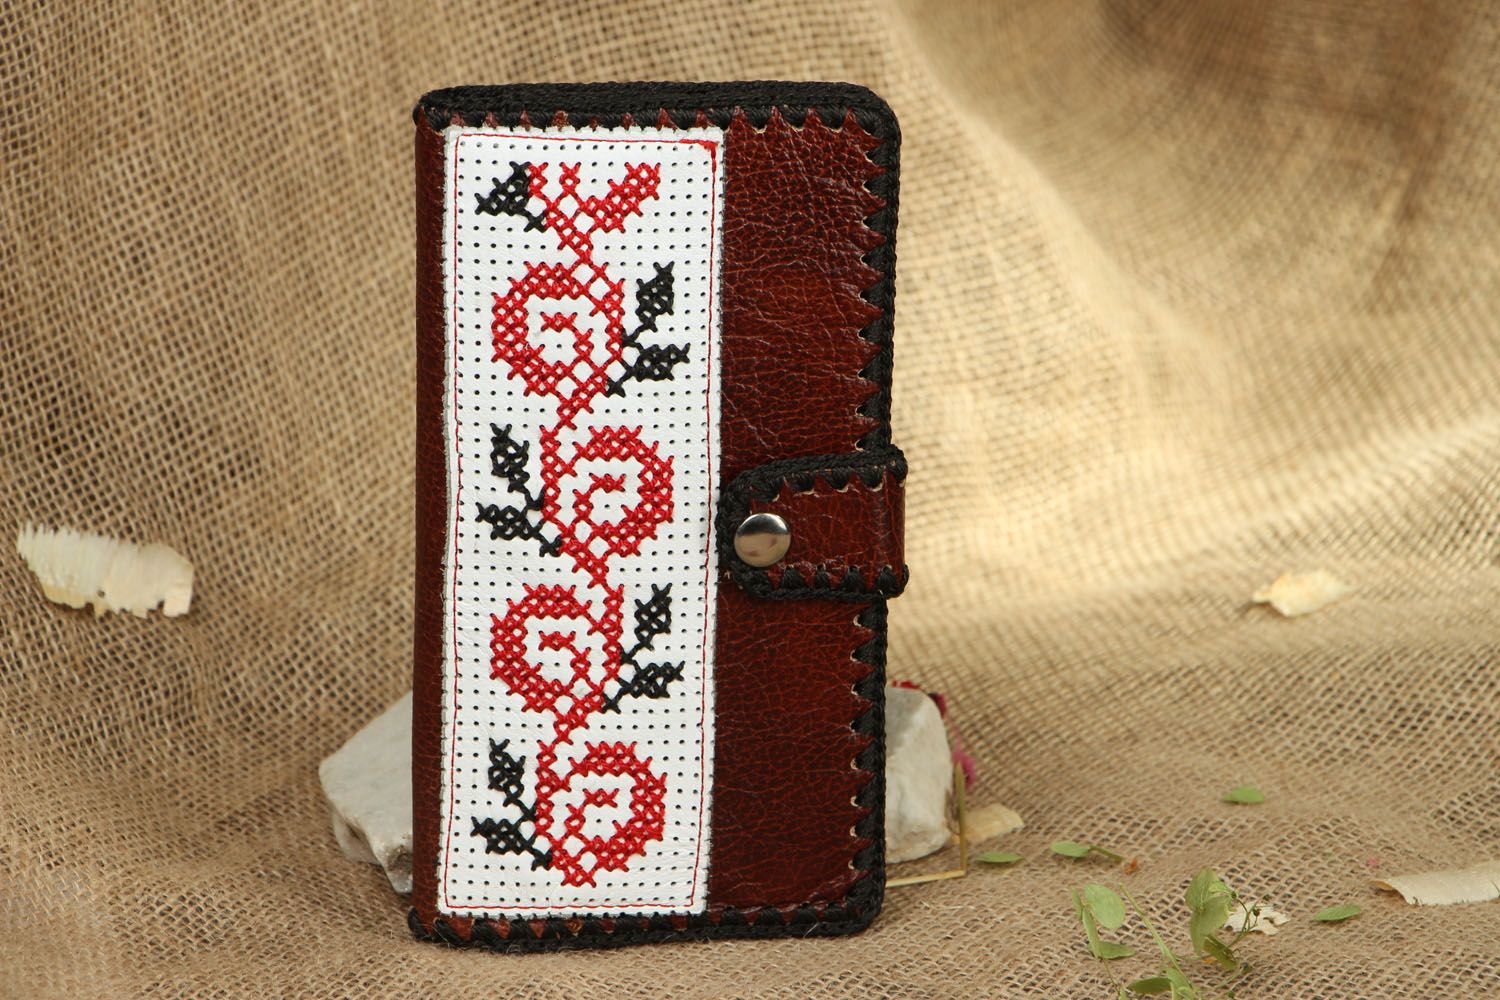 Cherry leather wallet photo 5